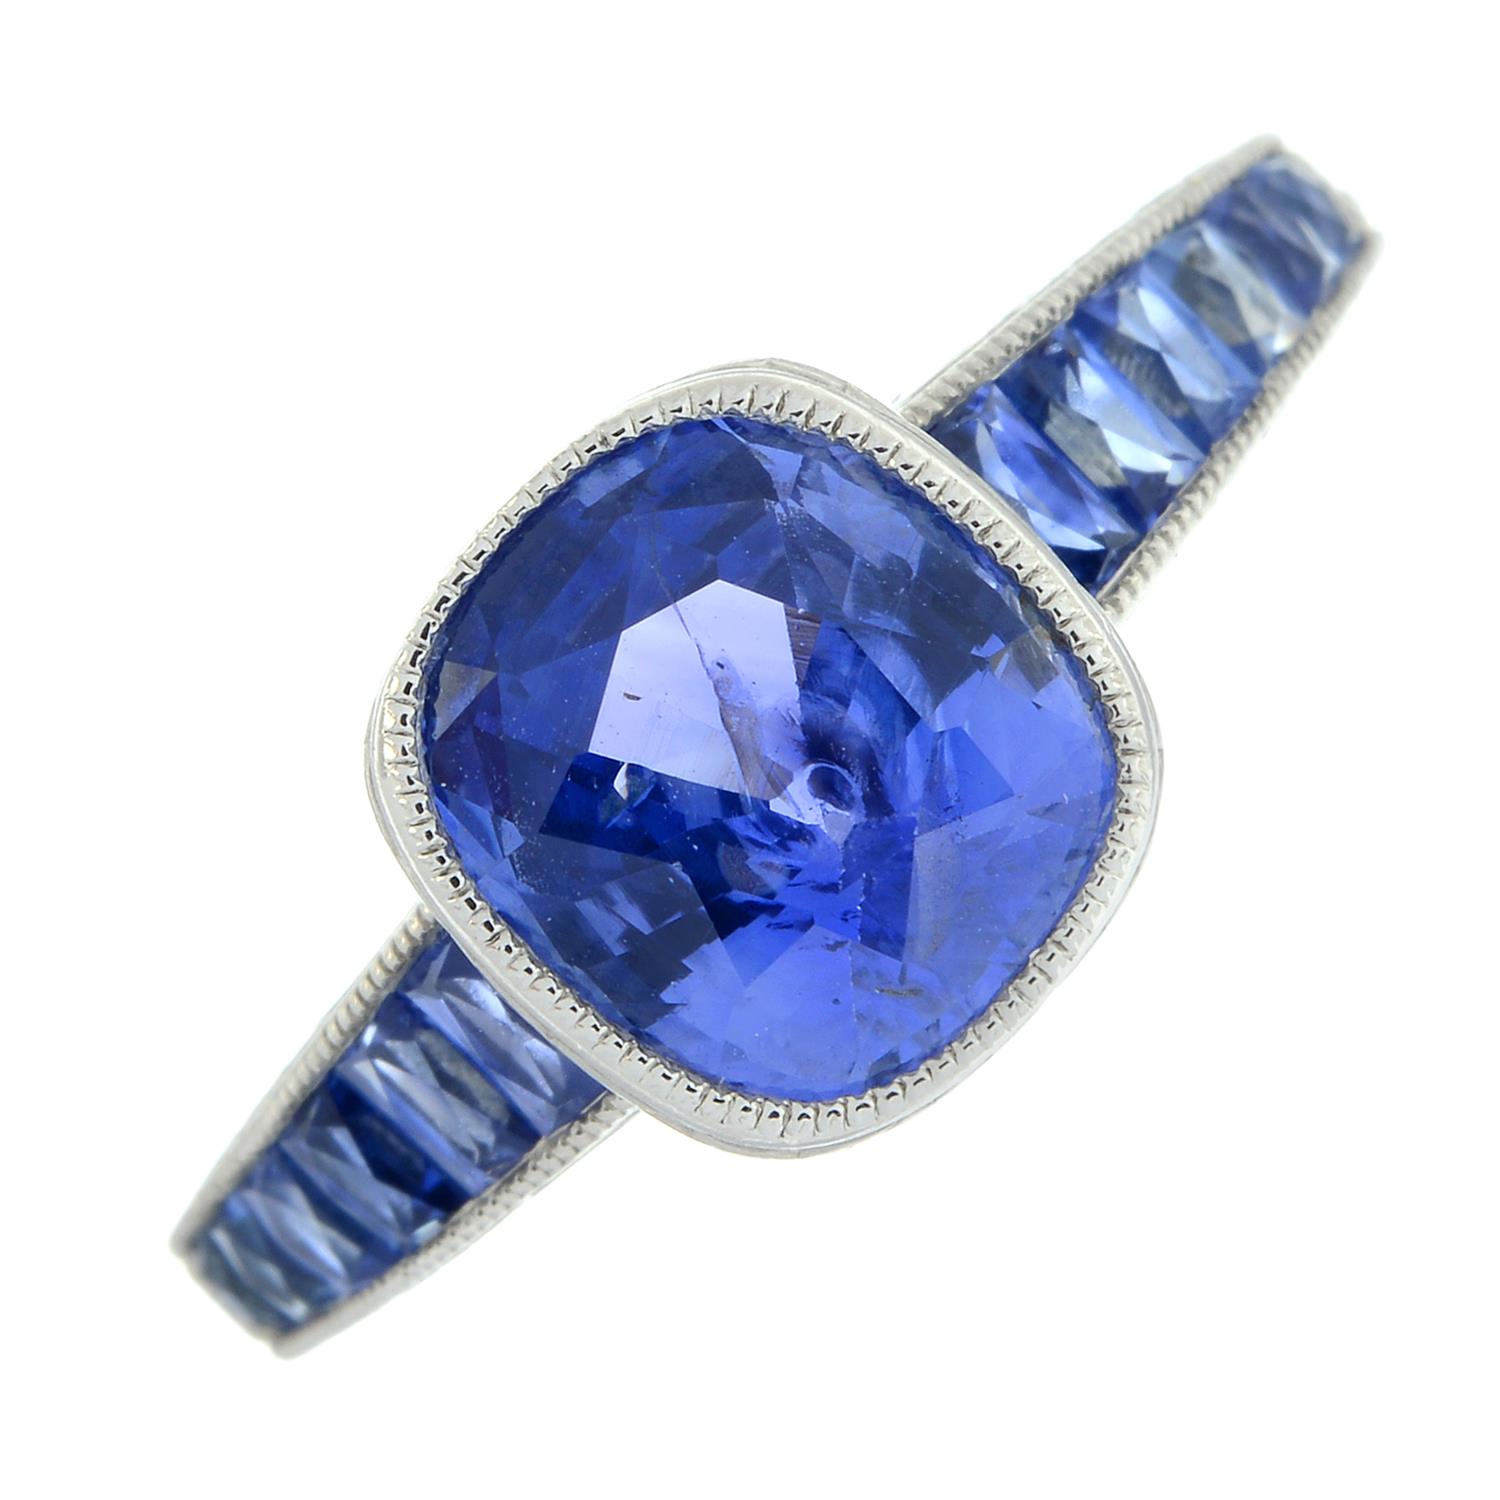 Sapphire ring, by JoAq - Image 2 of 7